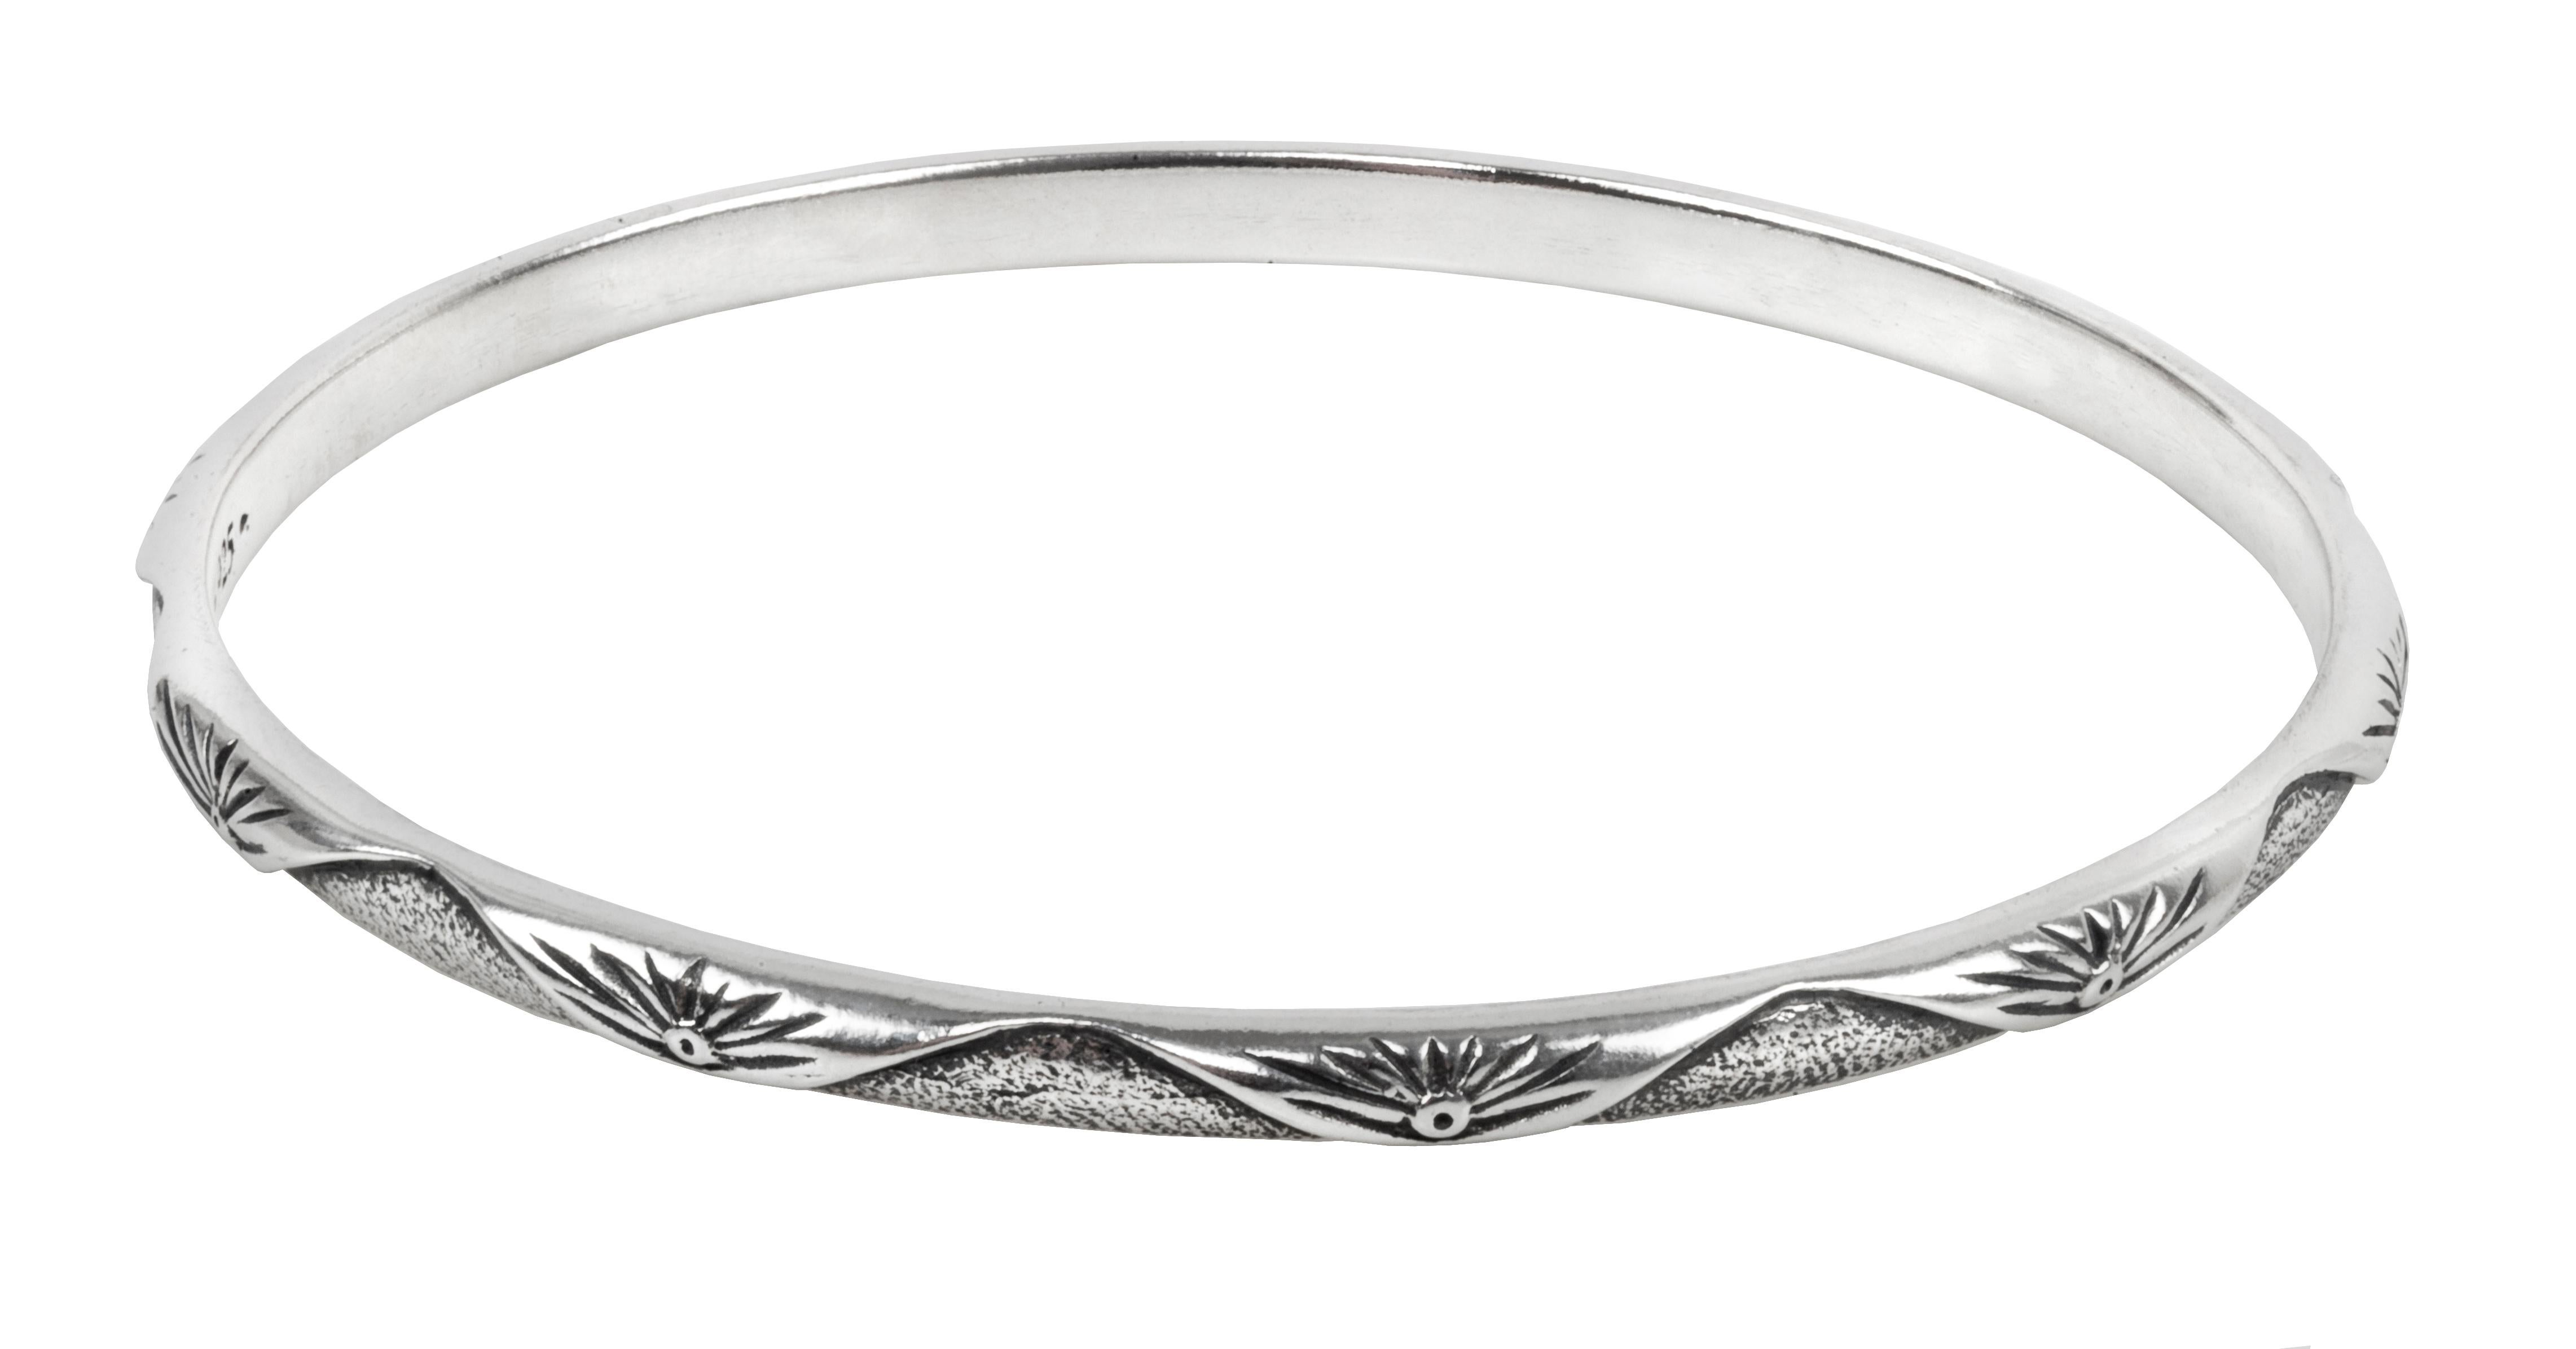 Bangle Bracelet from Konstantino in Sterling Silver.  Standard size 7.  Stamped Konstantino and 925.